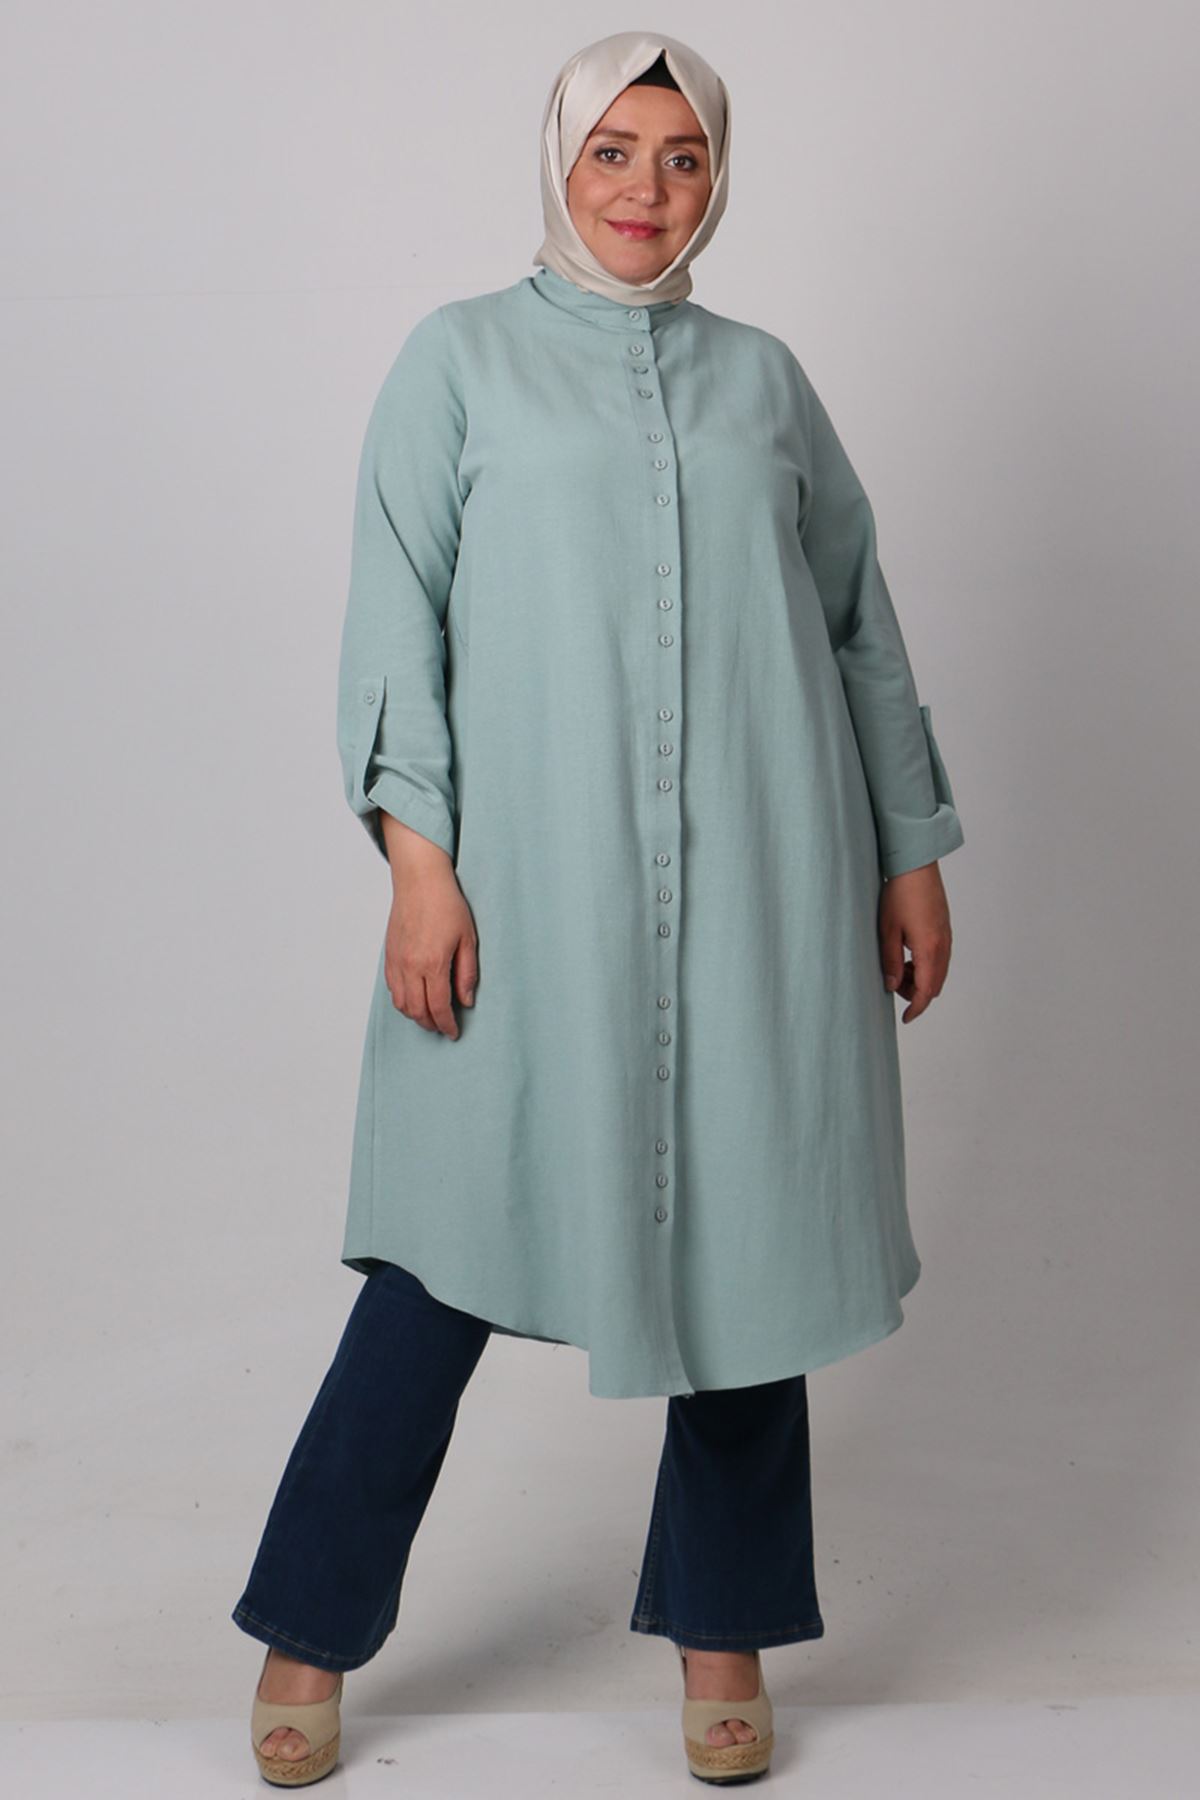 38064 Large Size Buttoned Linen Shirt -Turquoise